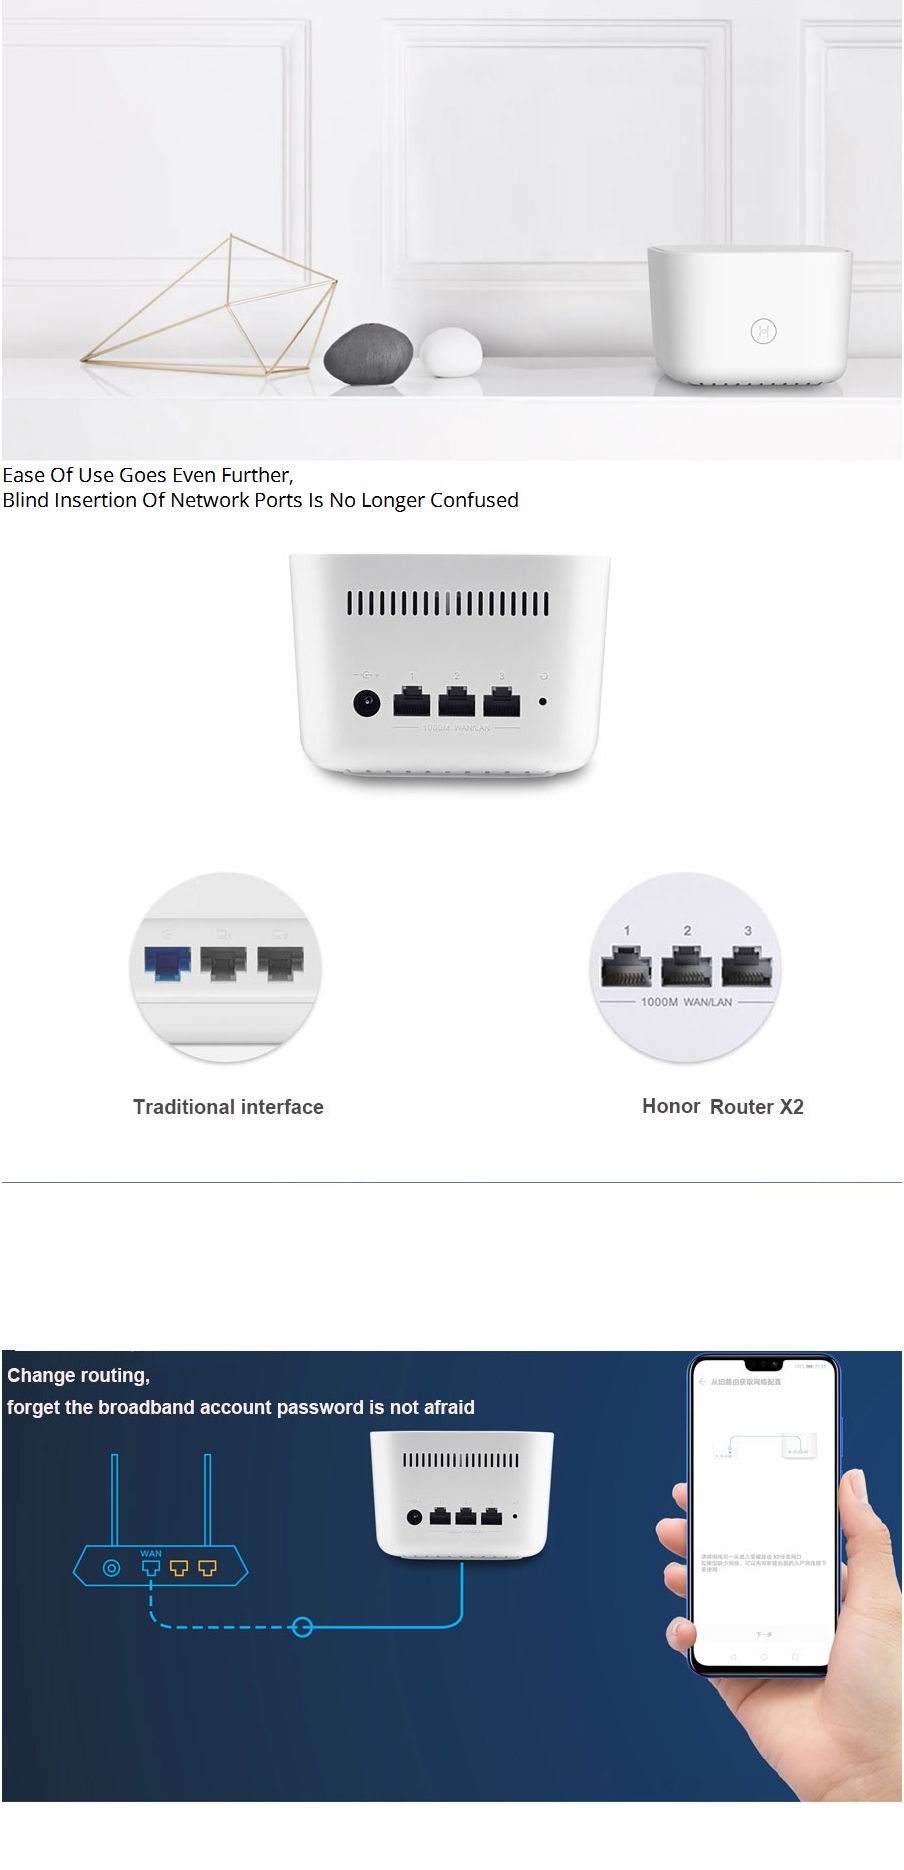 Honor-Router-X2-Dual-Core-Dual-Gigabit-Router-1200M-Dual-band-Wireless-WiFi-5G-Router-High-speed-Hom-1623165